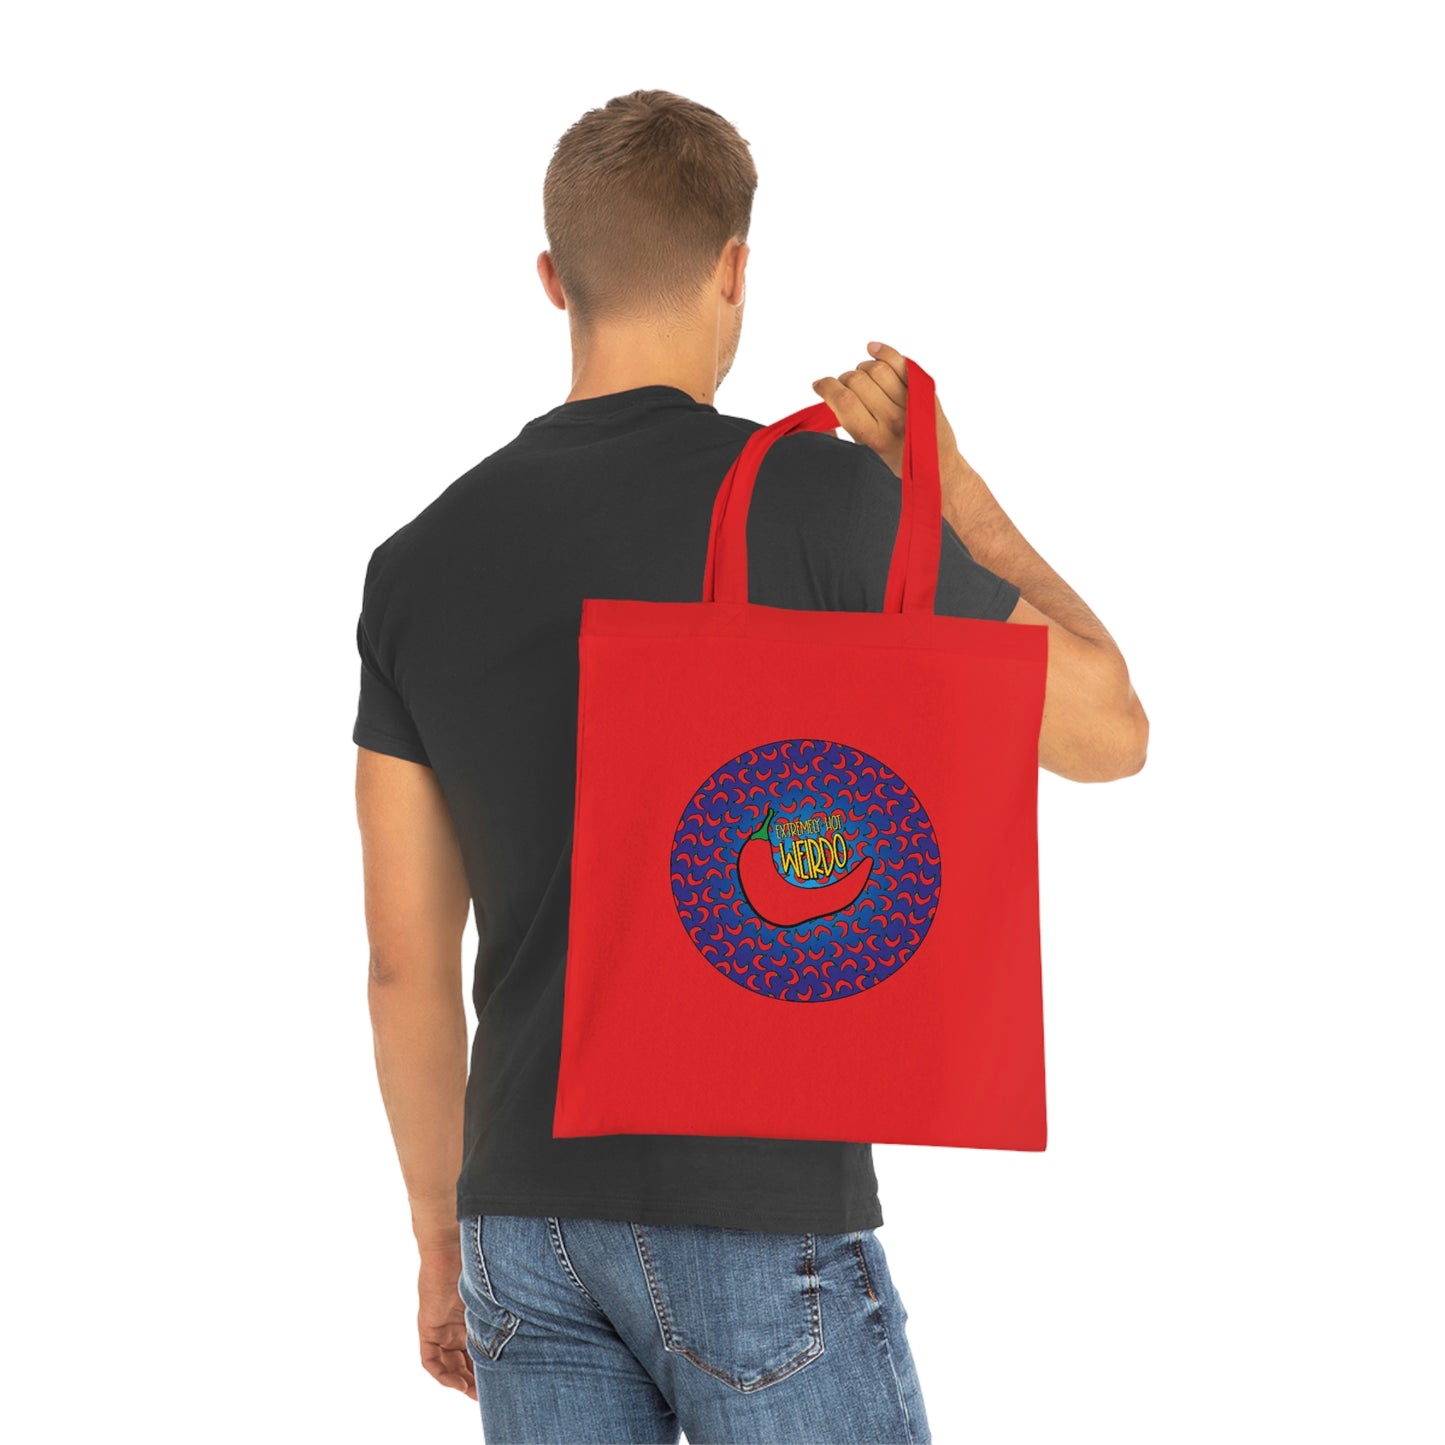 Weirdo | Red, 100% cotton tote bag with funny meme: Extremely Hot Weirdo. Are you hot and weird? Then this shopping bag is perfect for your daily shopping.